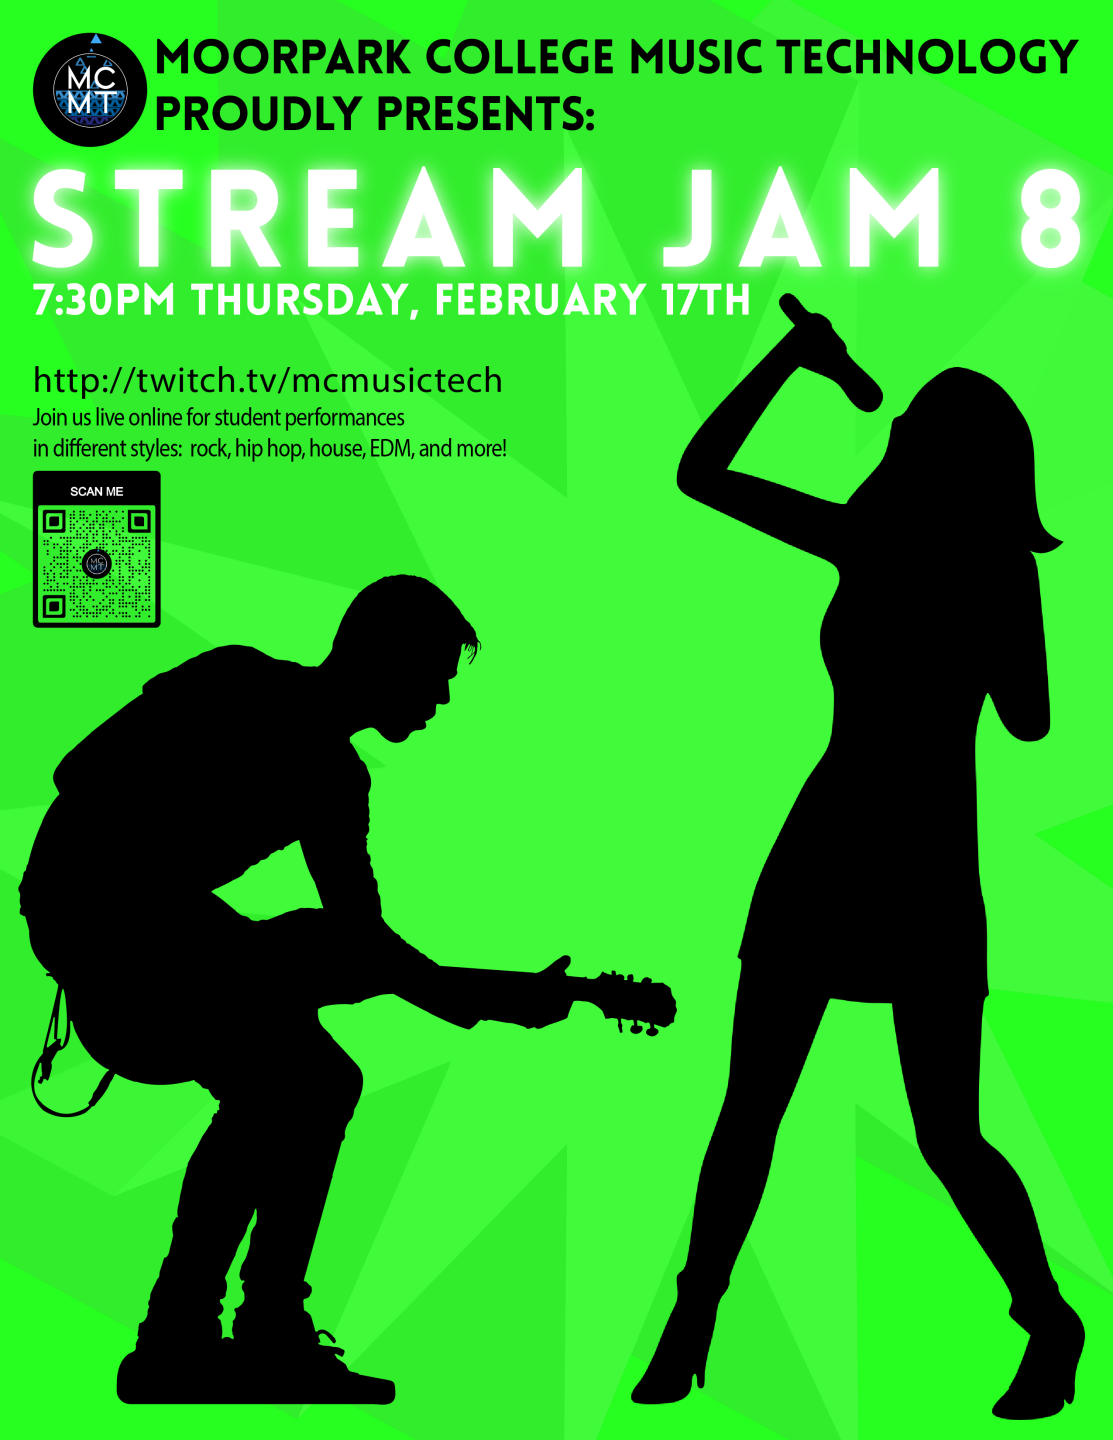 MC Music Technology Presents a FREE, VIRTUAL performance of their 8th STREAM JAM CONCERT at https://twitch.tv/mcmusictech